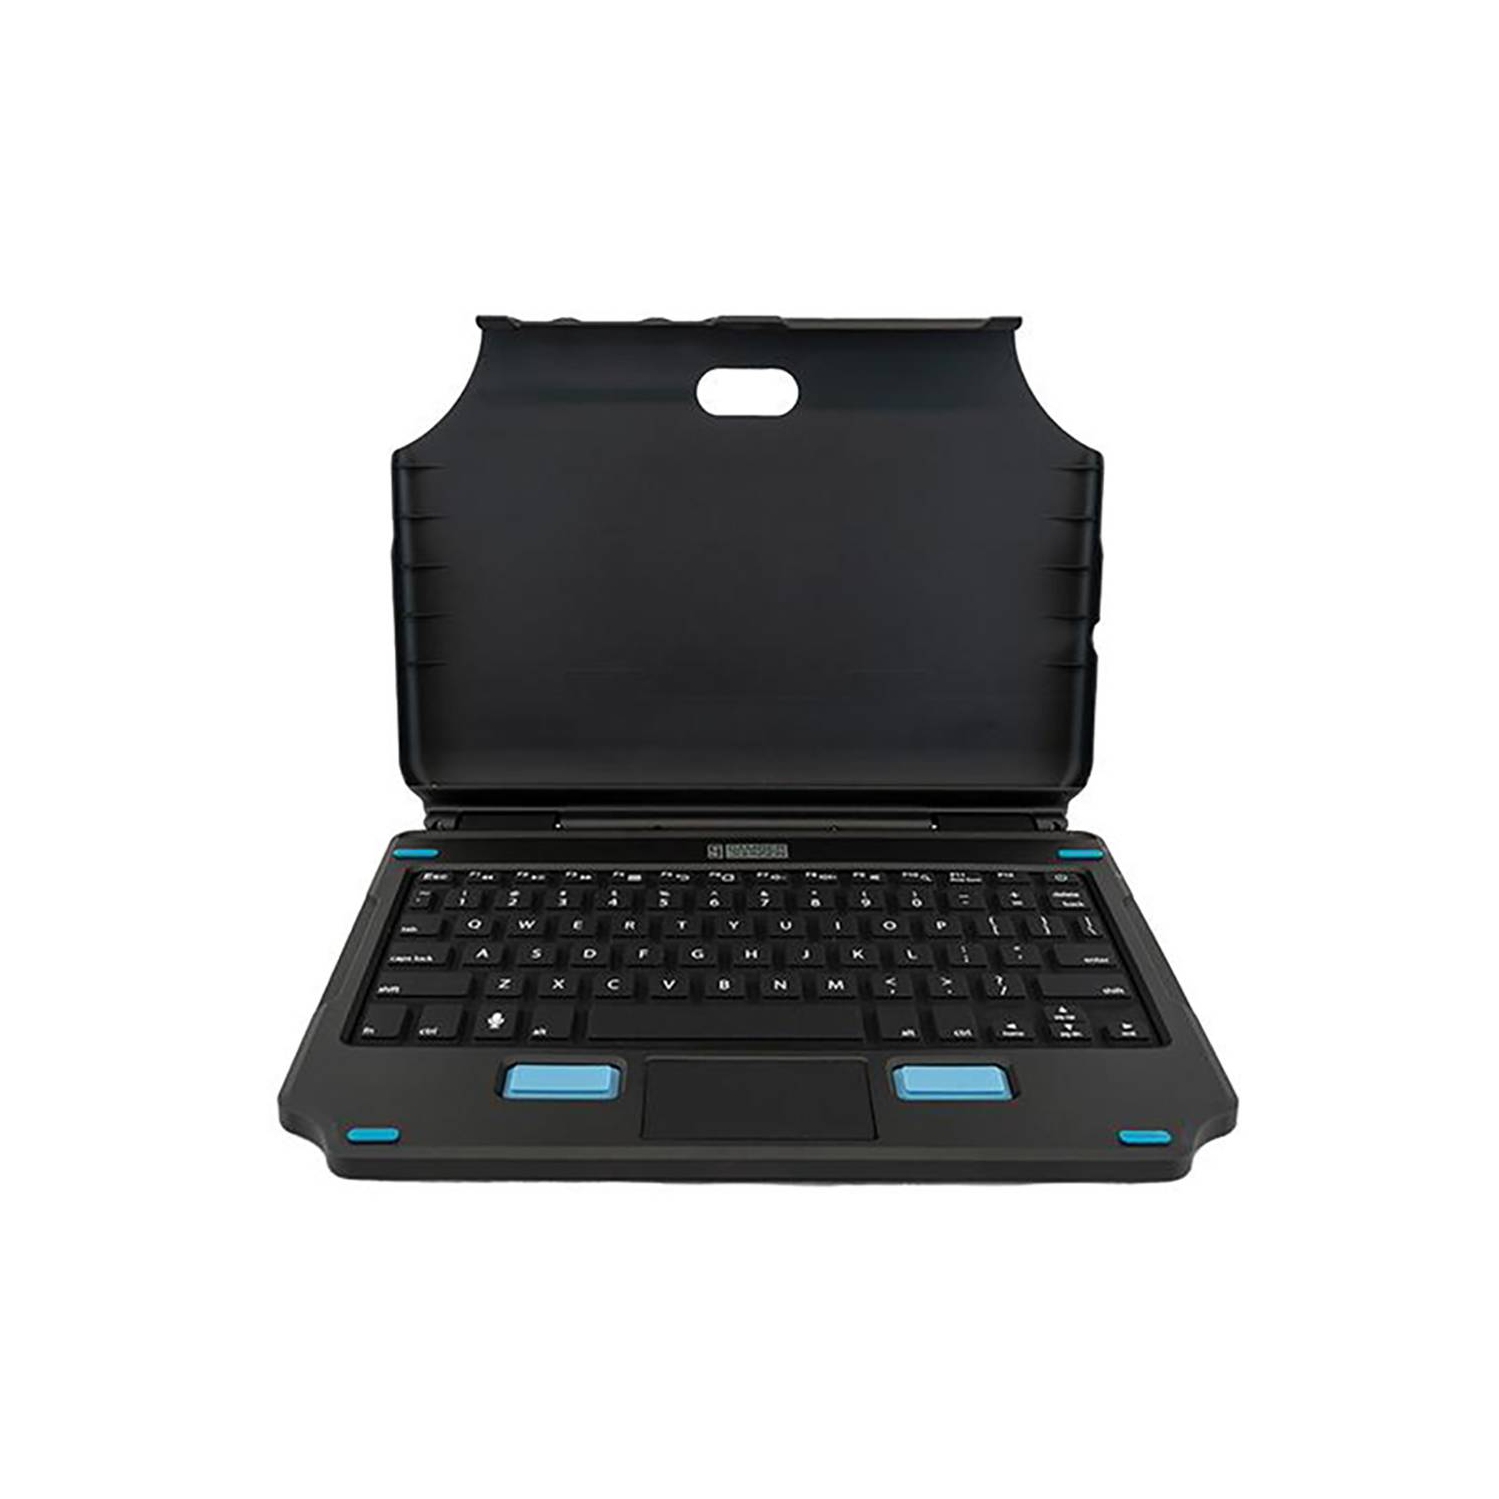 Brand New- Gamber Johnson, 2-in-1 Attachable Keyboard for the Samsung Galaxy Tab Active Pro/Tab Active4 Pro Tablet | Model # 7160-1450-00